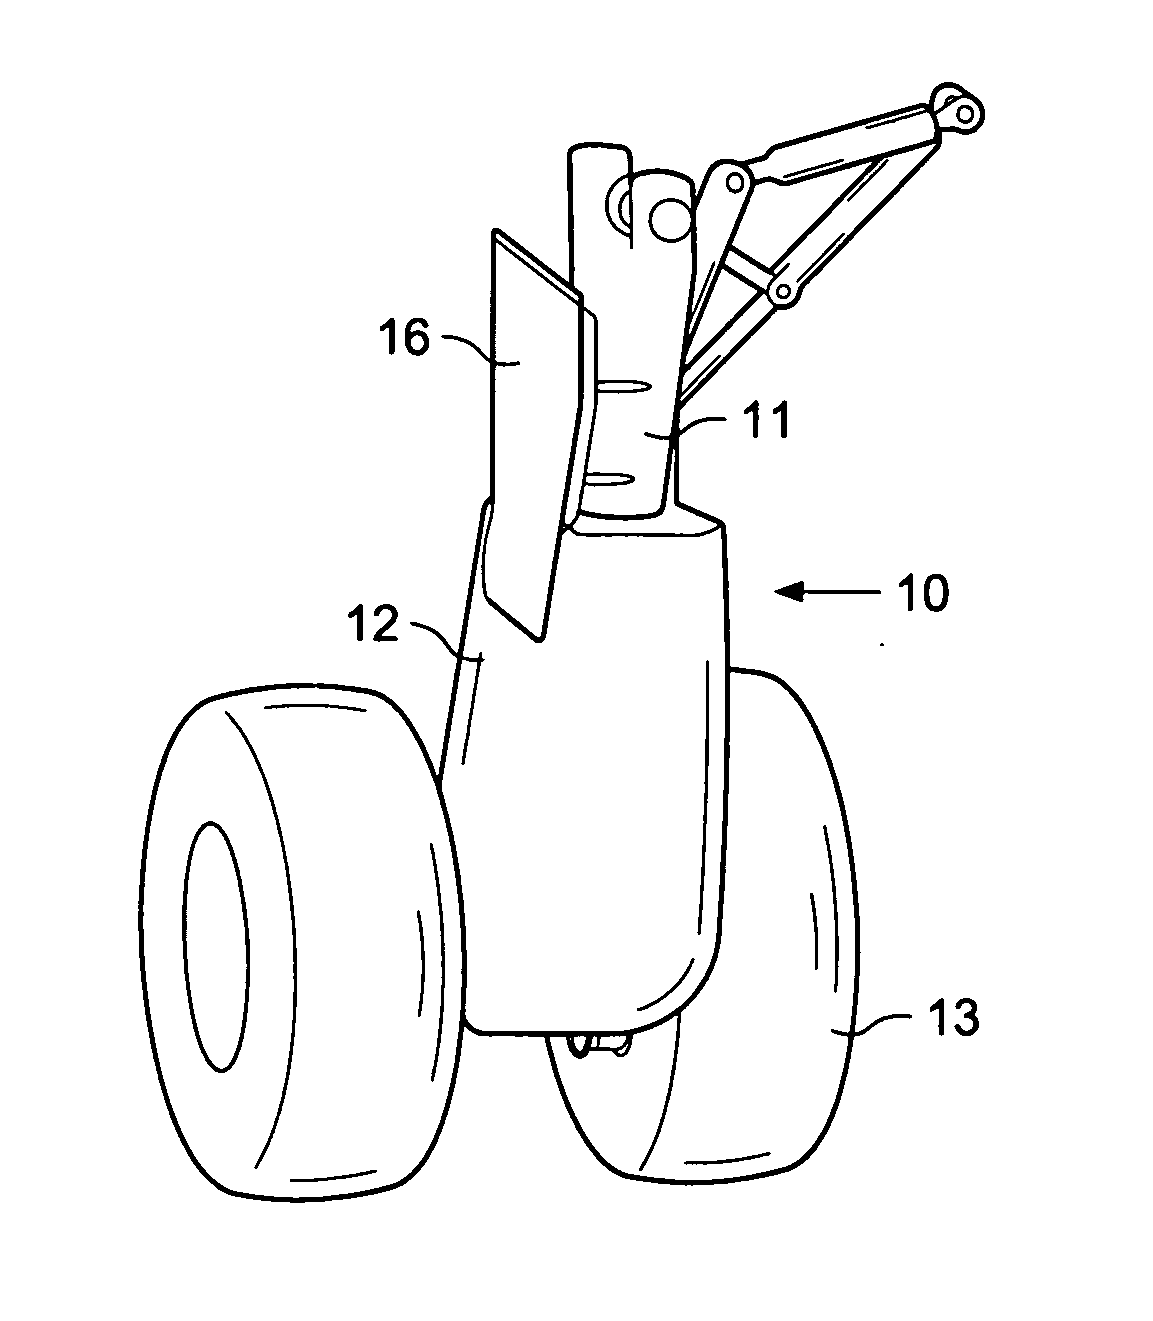 Landing gear with noise reduction fairing